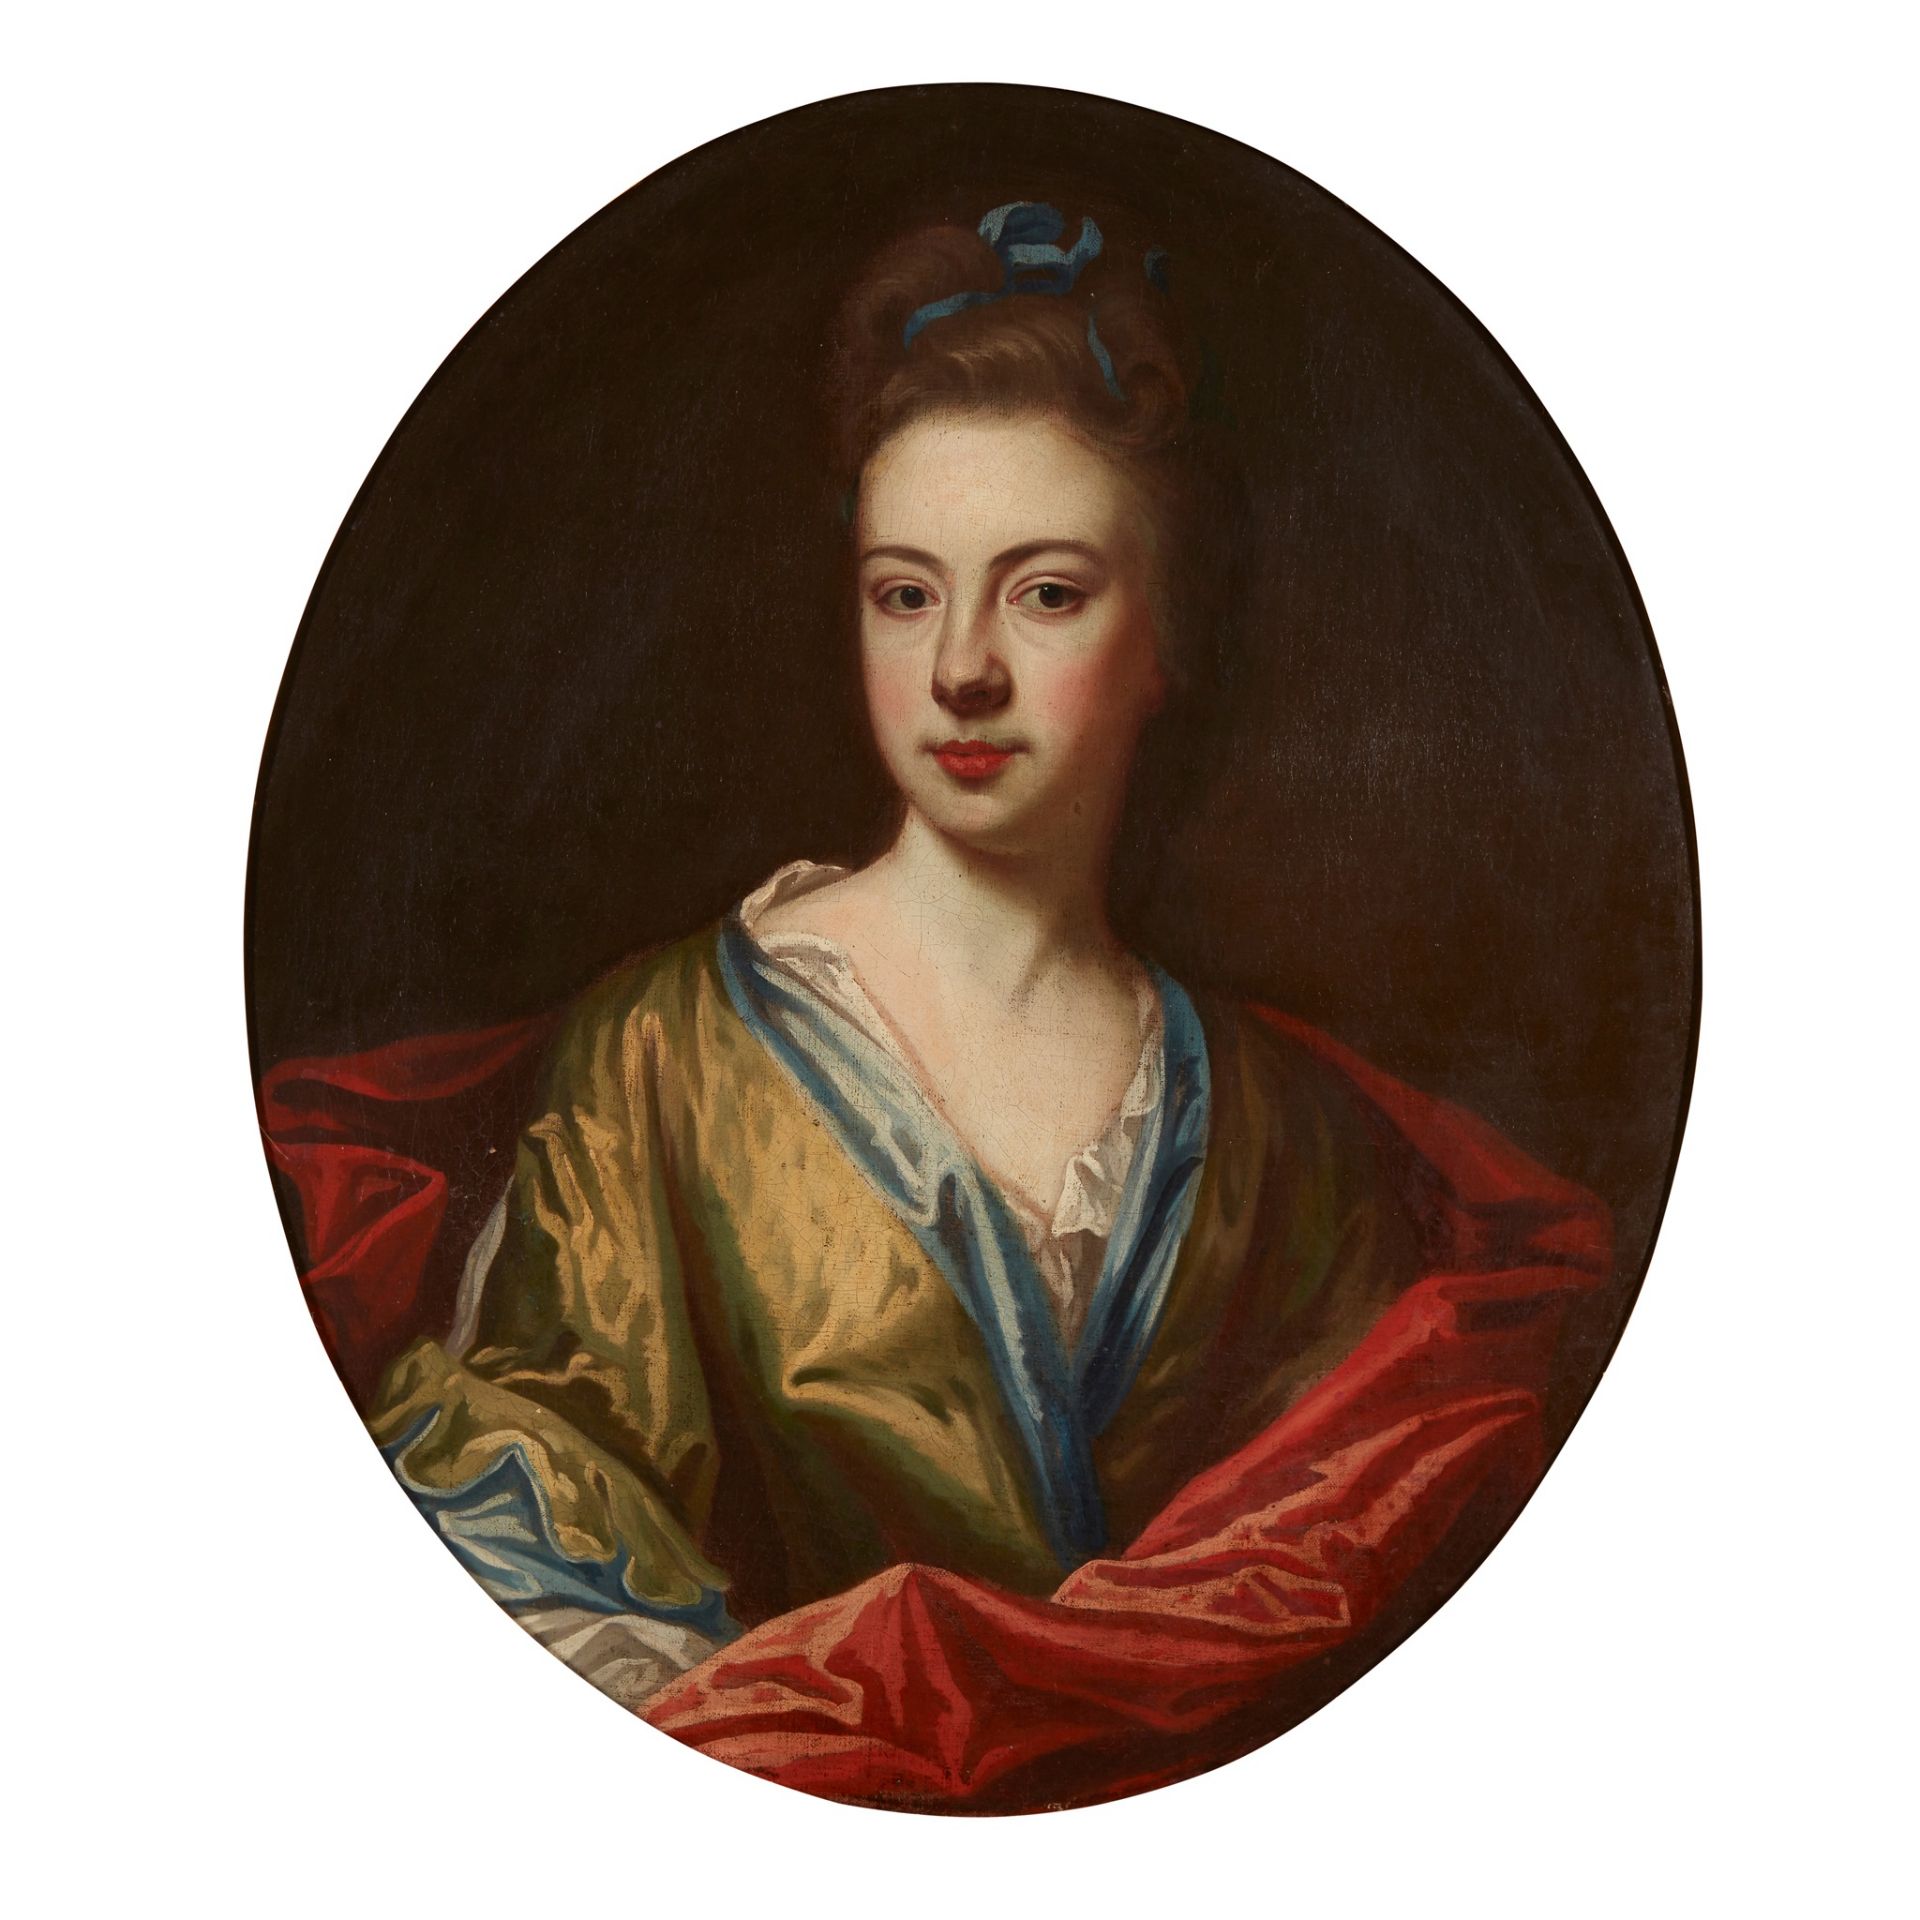 17TH CENTURY ENGLISH SCHOOL HALF LENGTH PORTRAIT OF A WOMAN IN CHARTREUSE DRESS WITH RED WRAP